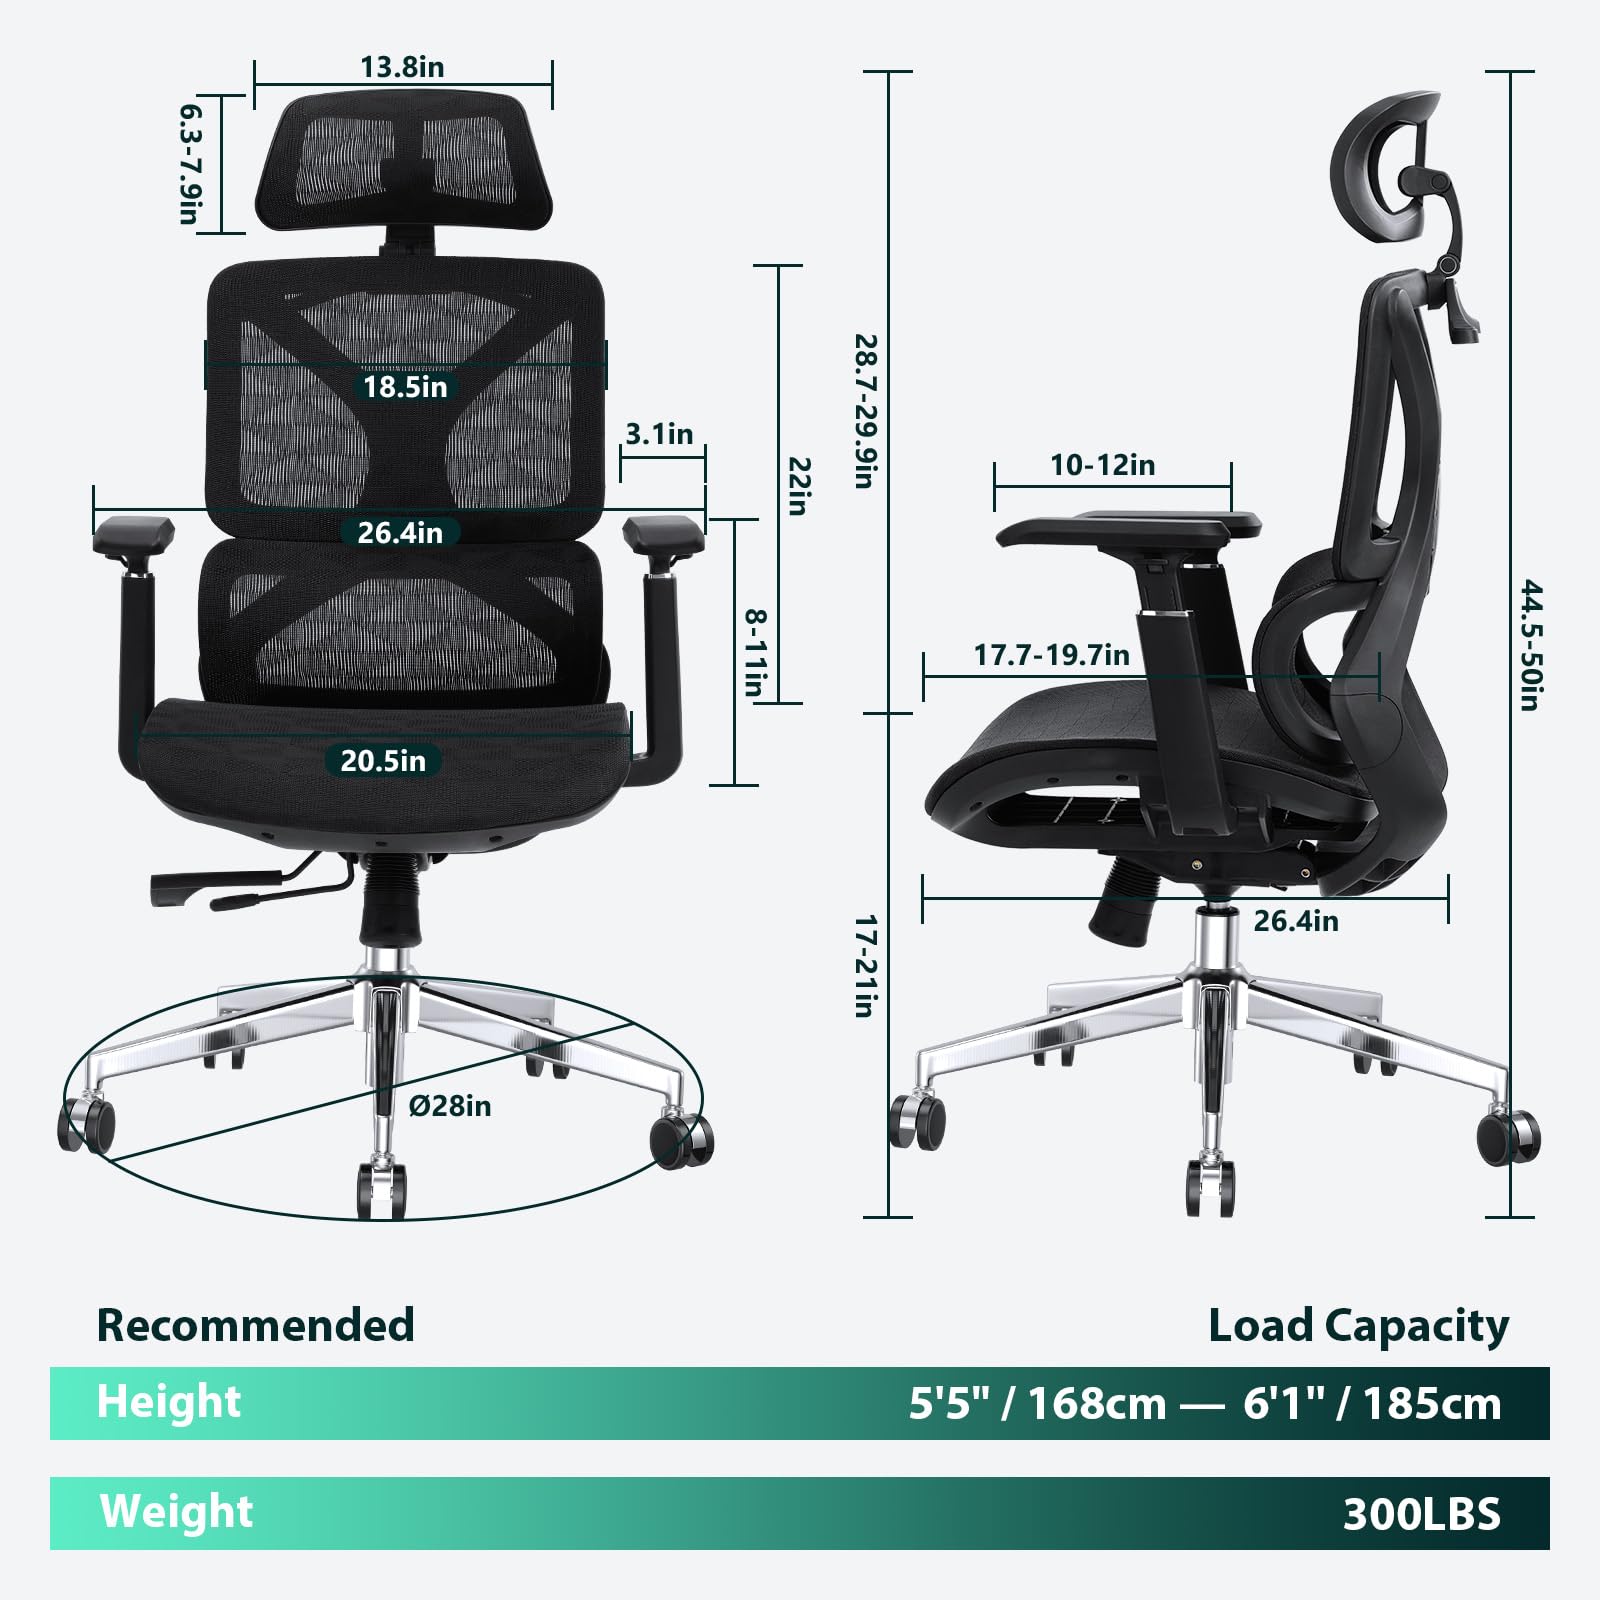 Ergonomic Office Chair, High Back Mesh Executive Chair with Lumbar Support, Adjustable Seat Depth, 3D Armrest & Headrest, Comfy Computer Desk Chair with Metal Base, for Gaming, Hotel, Black